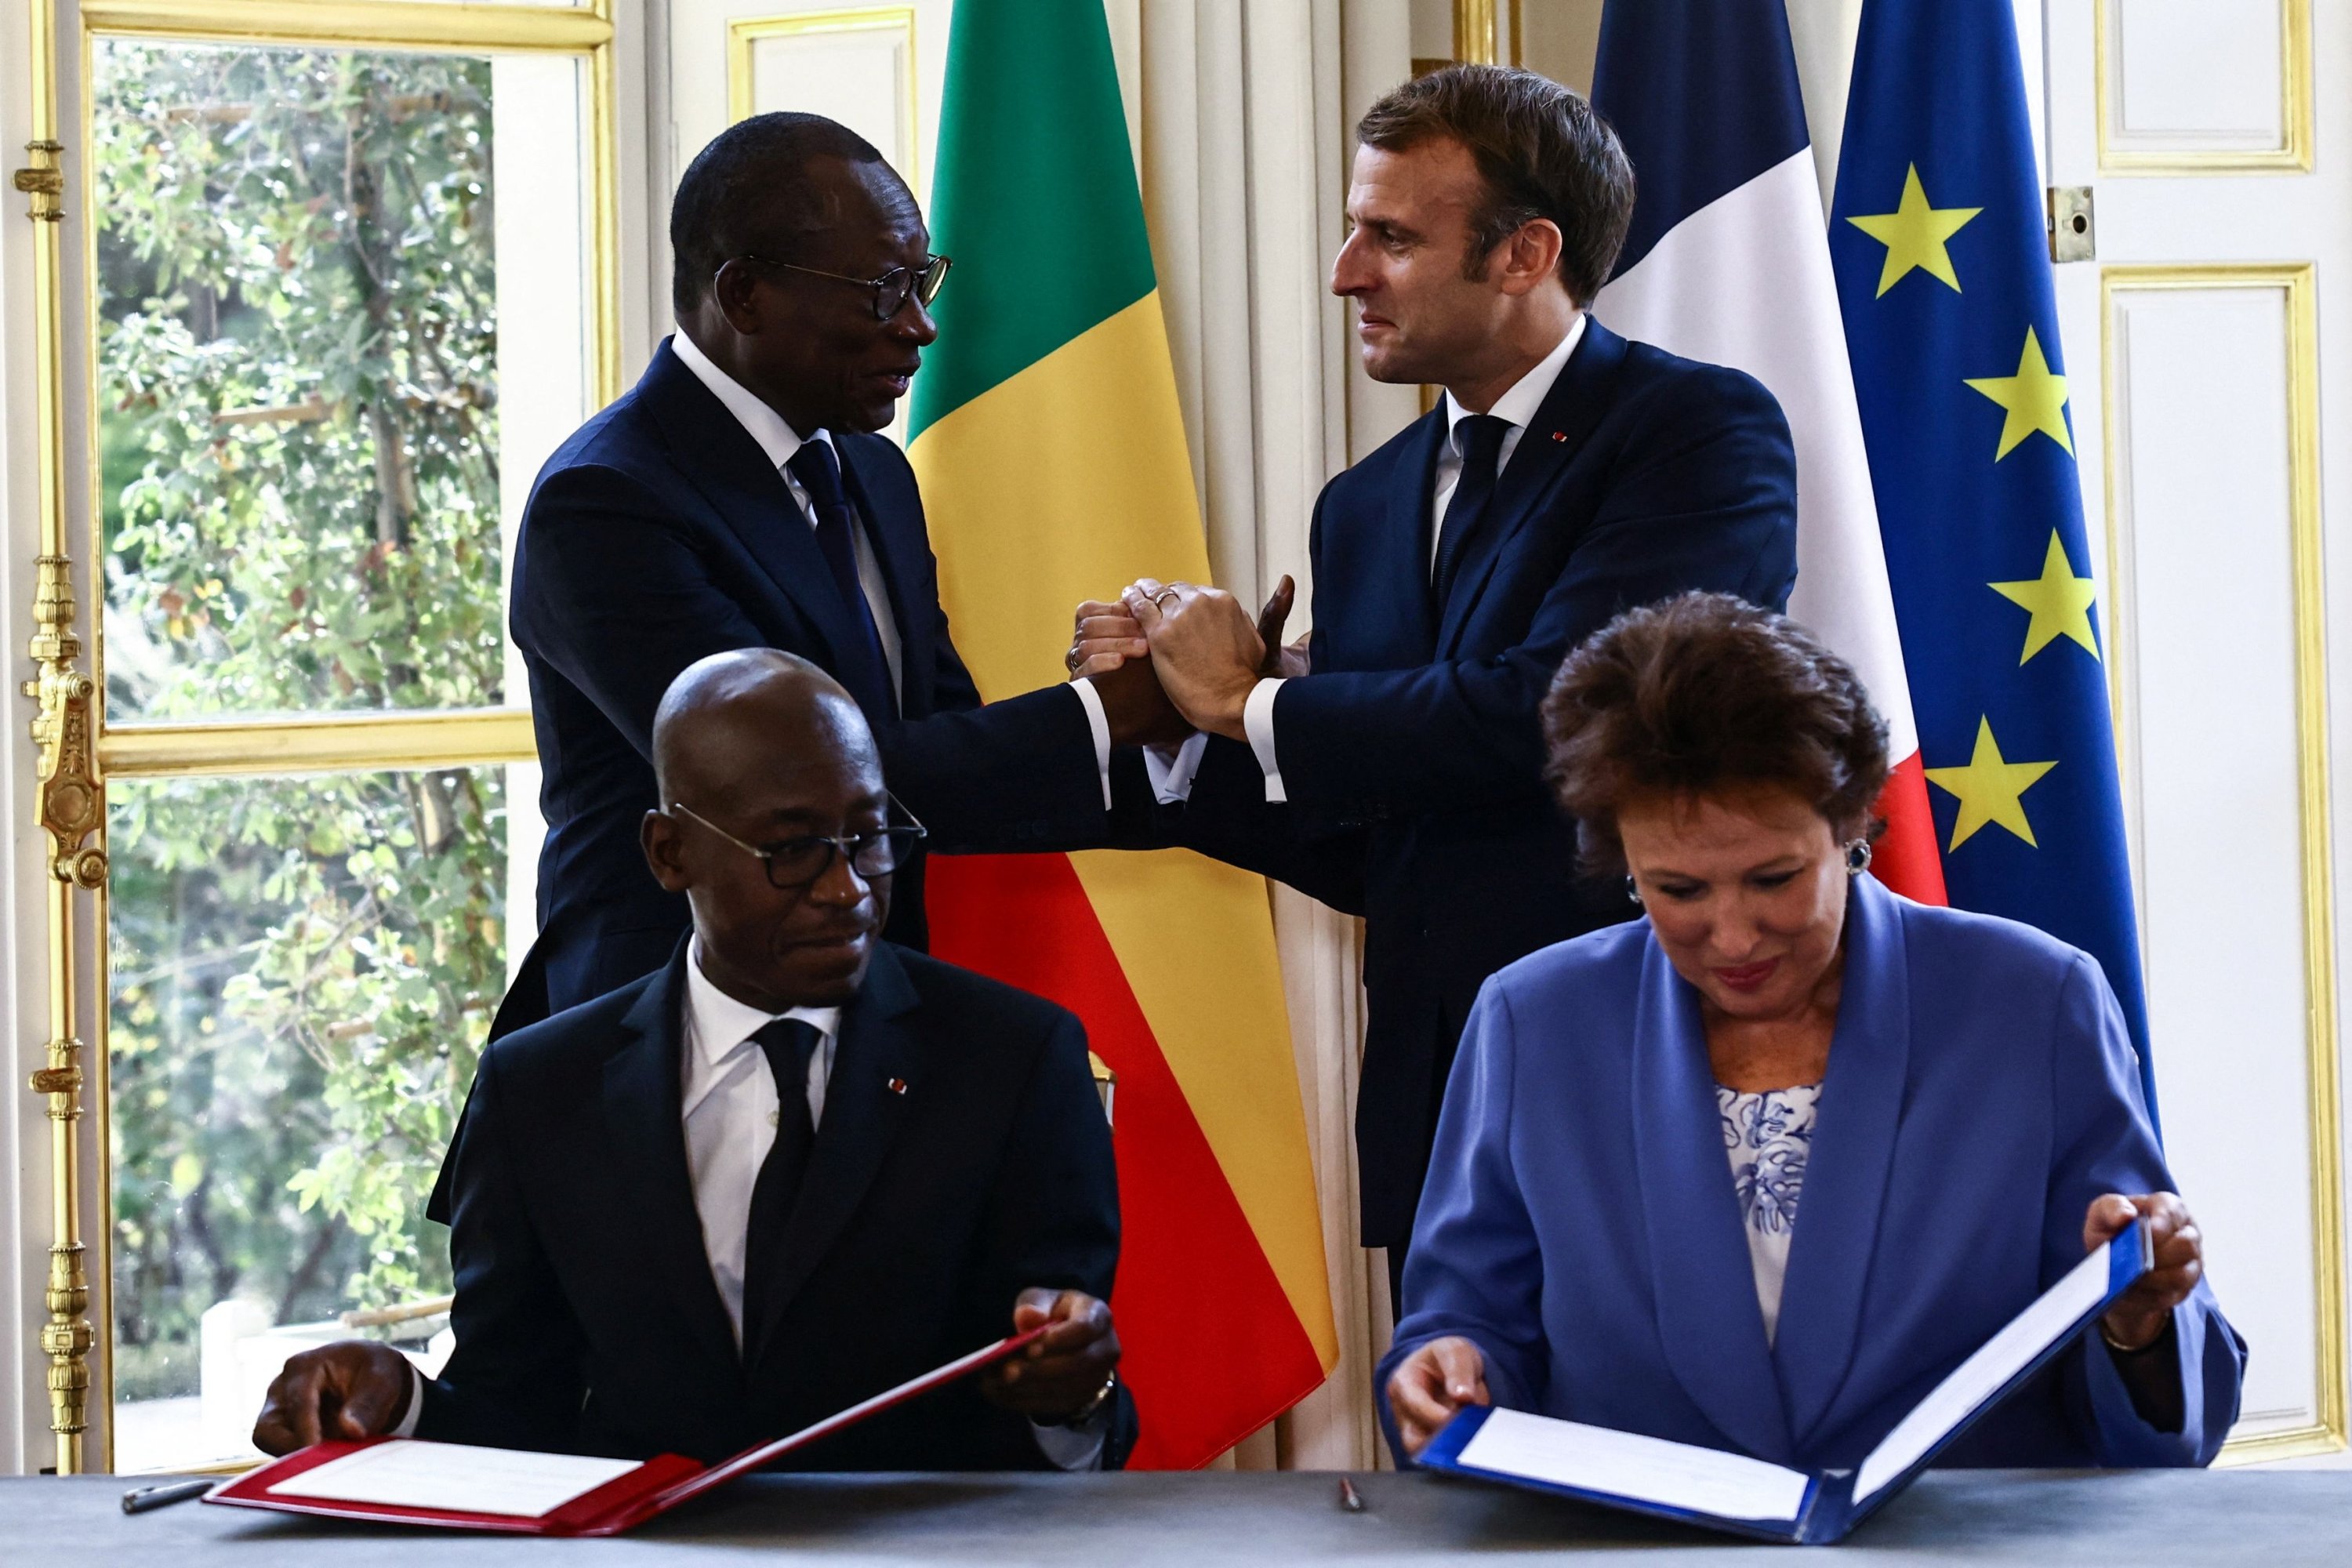 President Emmanuel Macron greets President Patrice Talon as Minister Roselyne Bachelot and Minister Jean-Michel Abimbola sign an agreement on the return of looted cultural artifacts, at the Elysee Palace in Paris, France, Nov. 9, 2021. (AFP Photo)